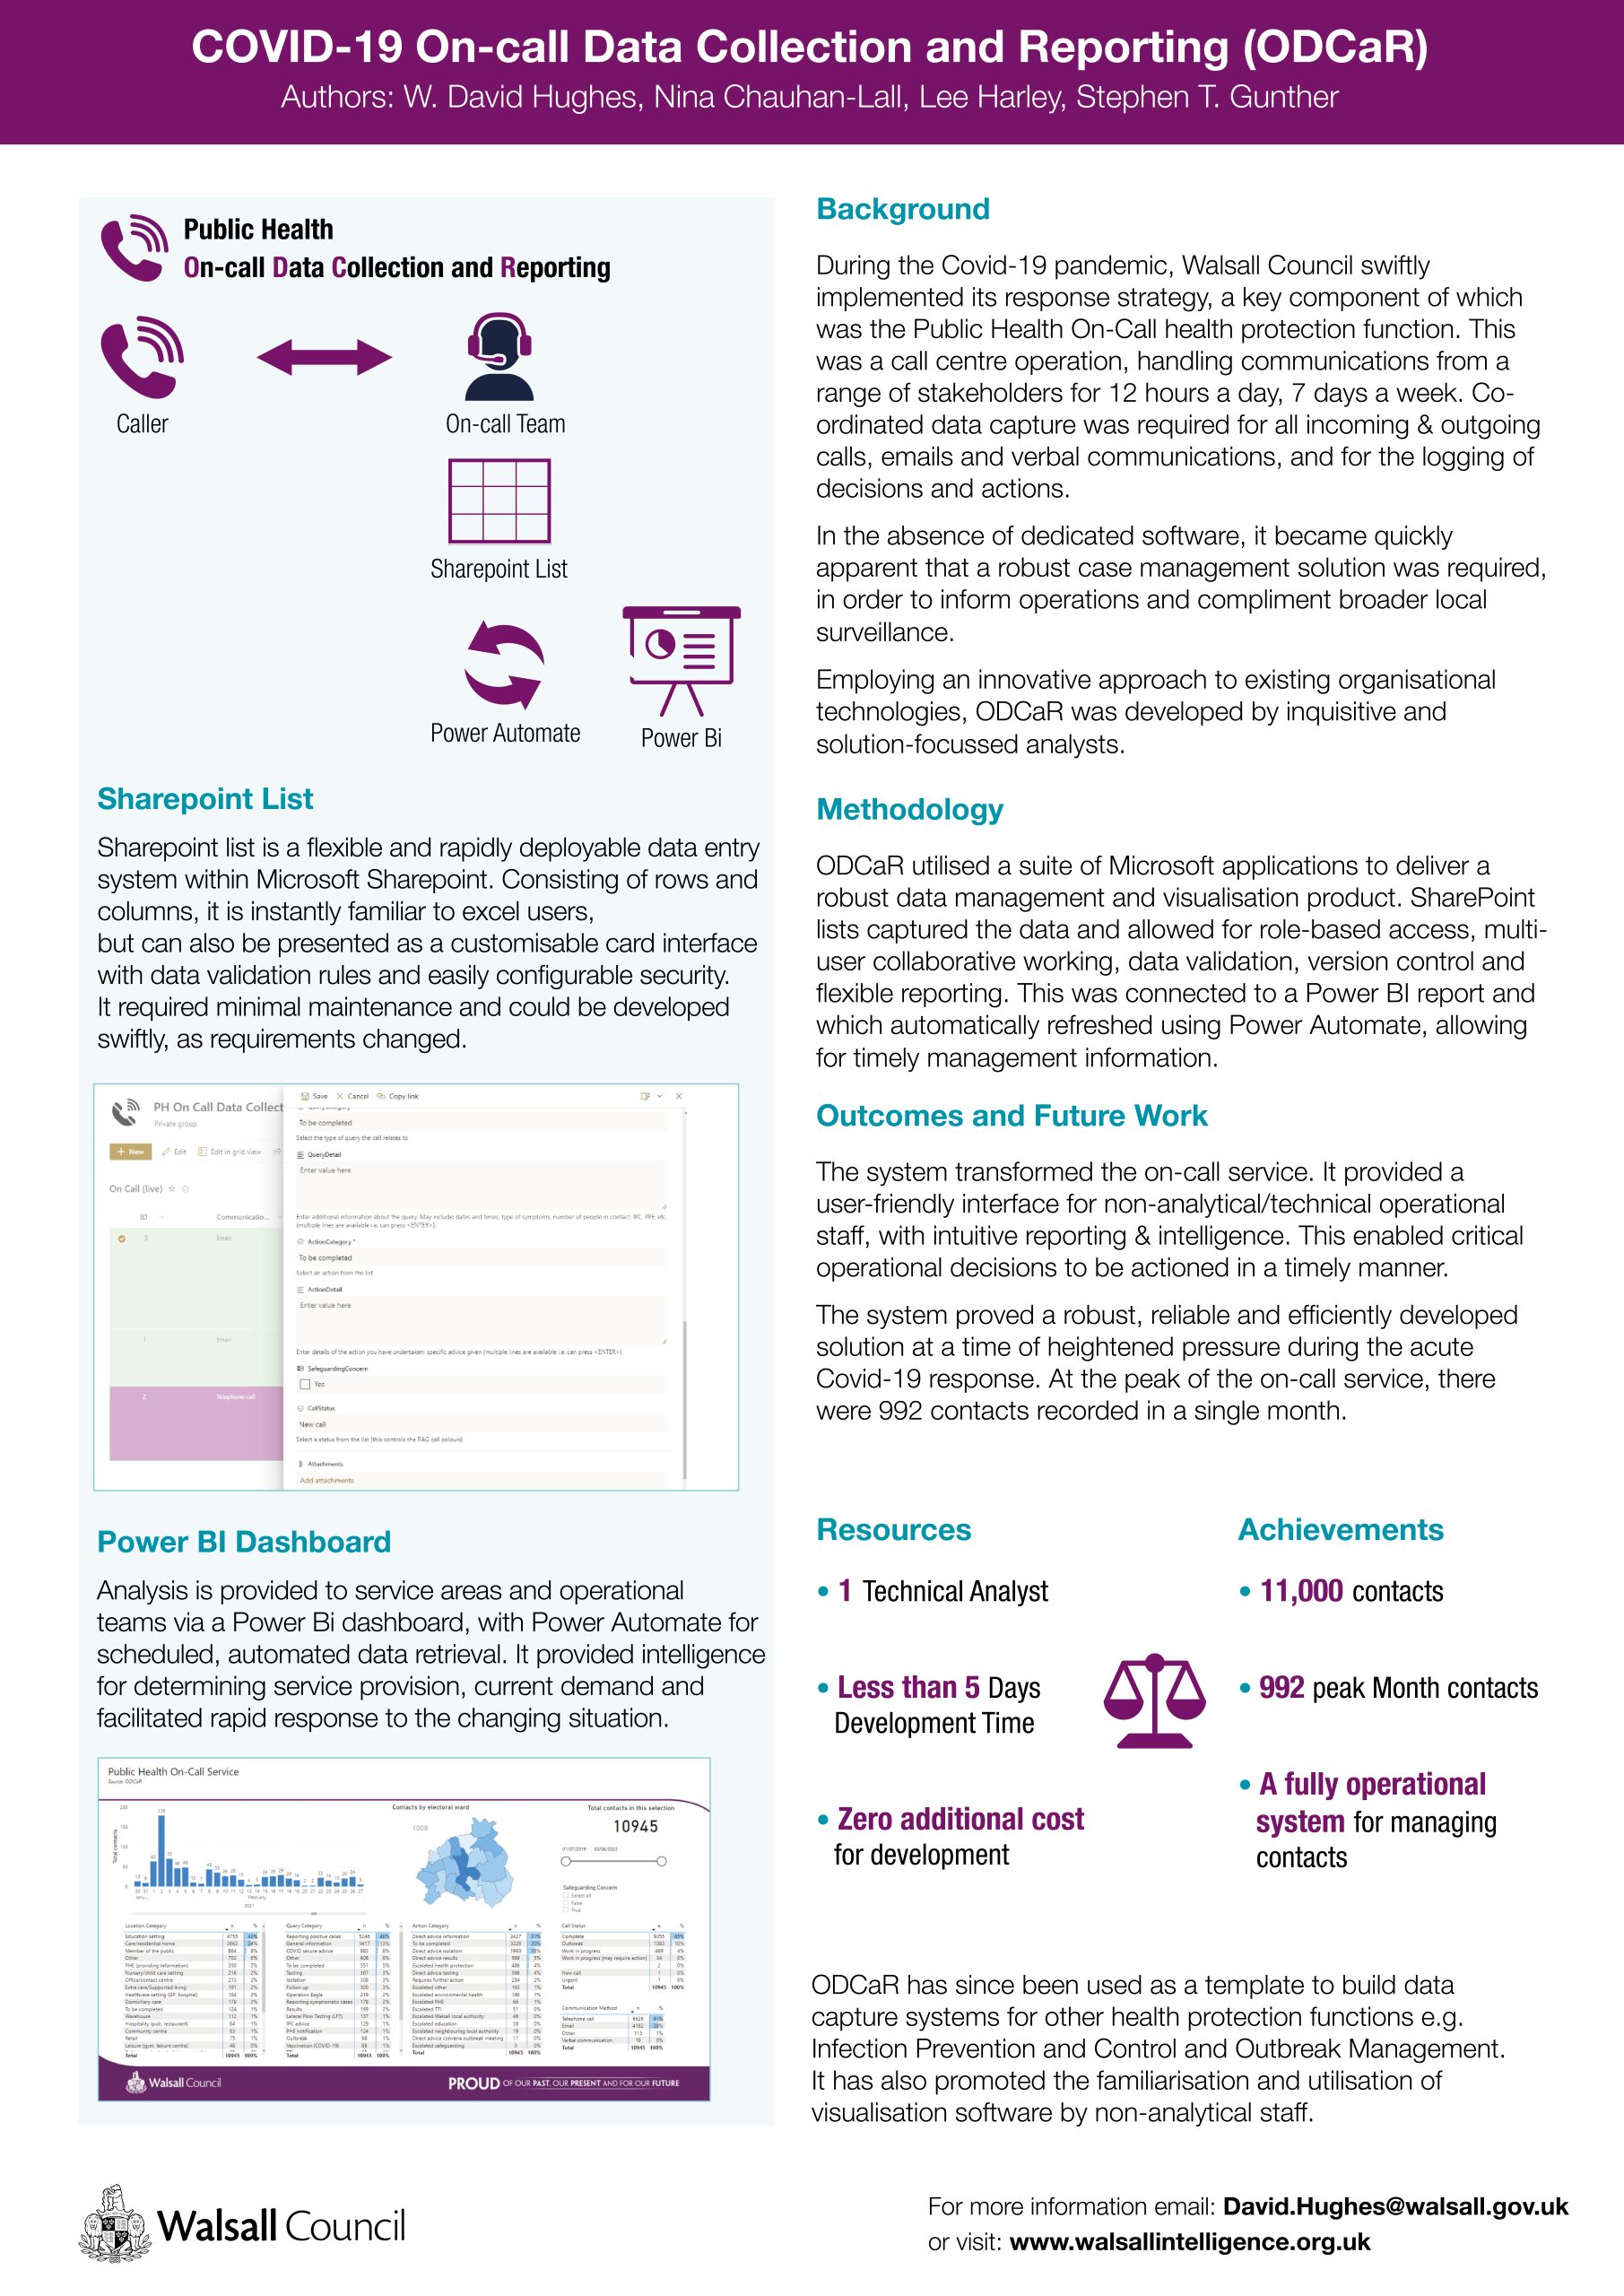 Conference Poster for ODCaR COVID-19 Reporting System